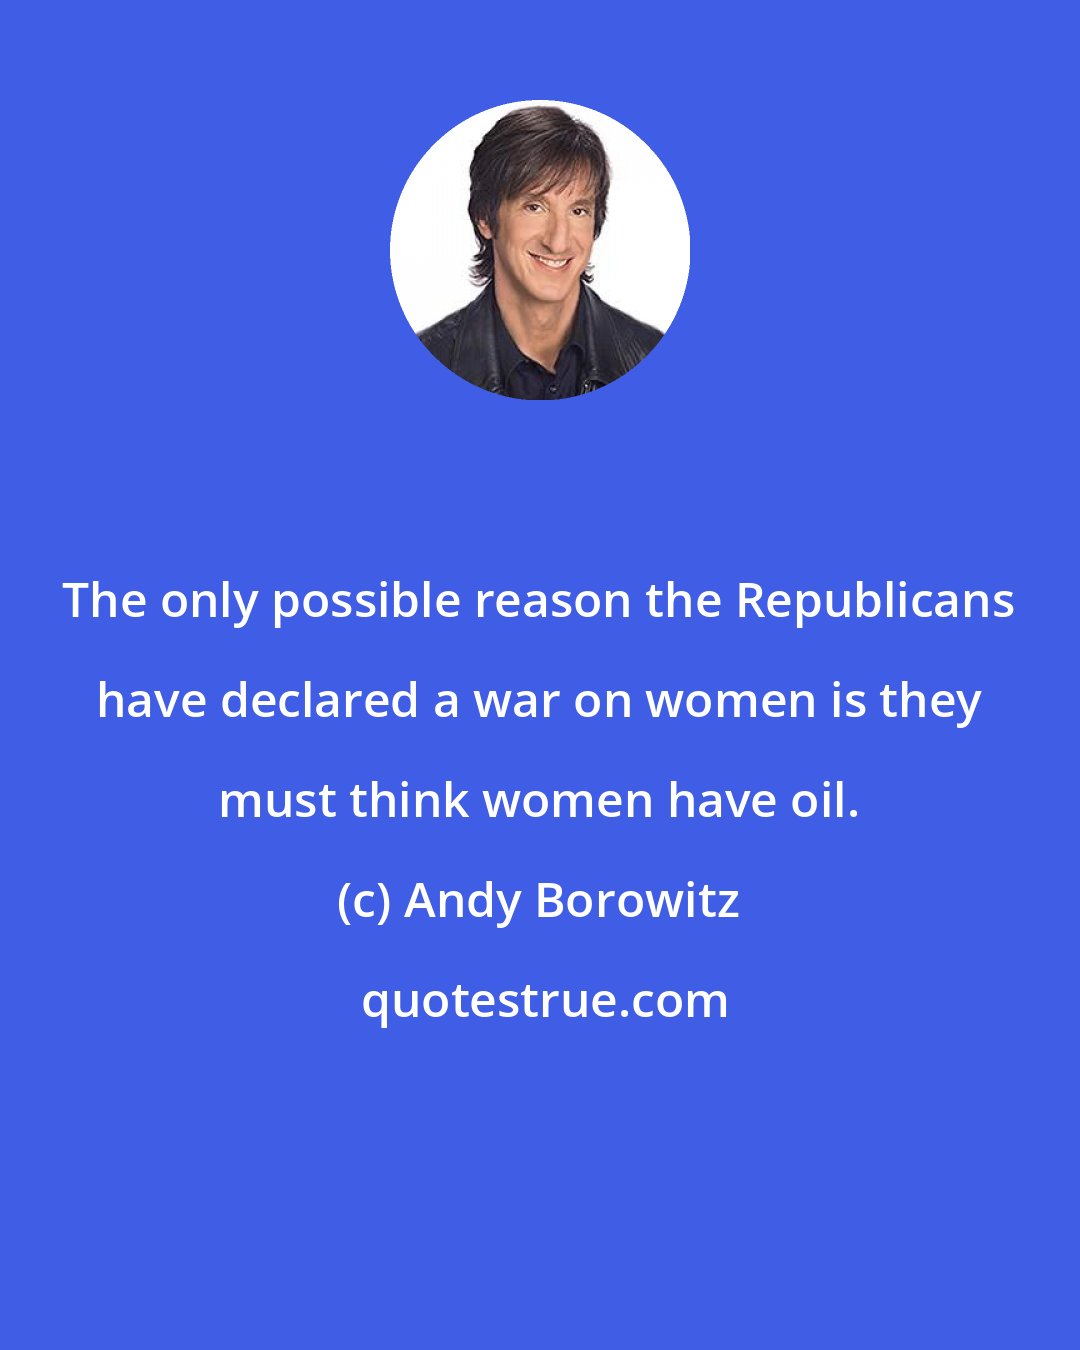 Andy Borowitz: The only possible reason the Republicans have declared a war on women is they must think women have oil.